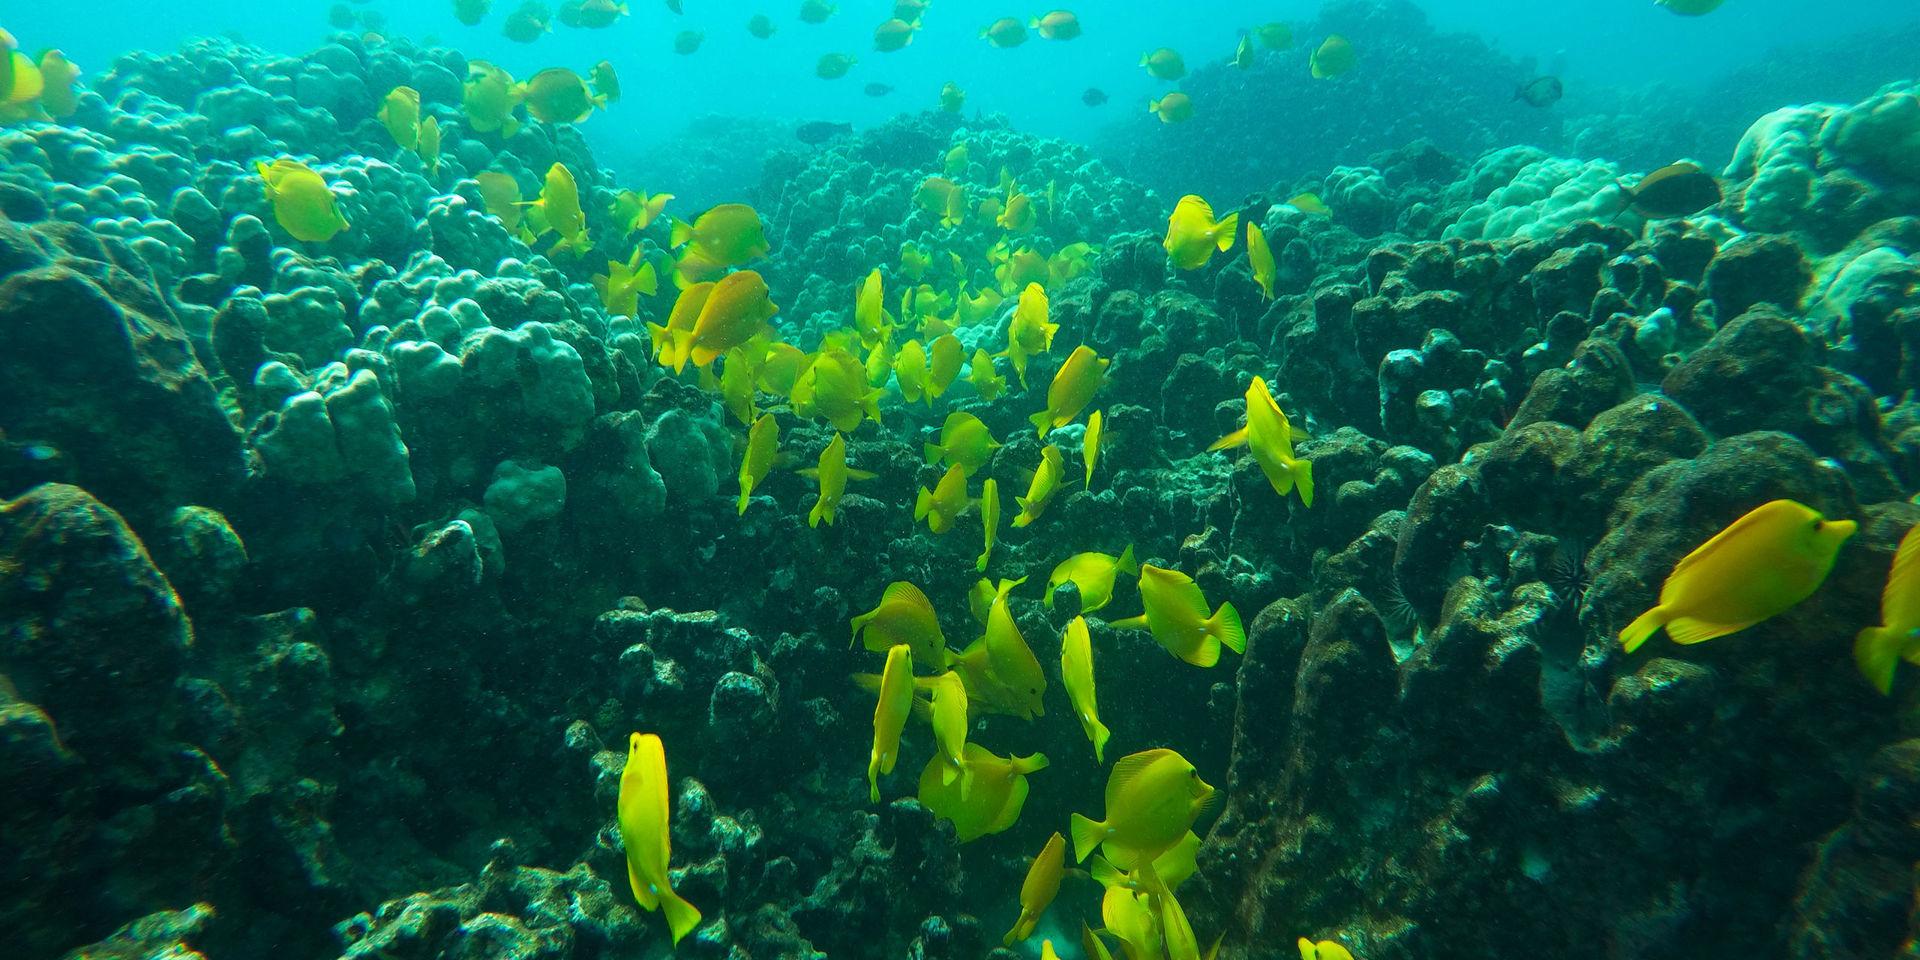 This Sept. 12, 2019 photo shows fish near coral in a bay on the west coast of the Big Island near Captain Cook, Hawaii. Just four years after a major marine heat wave killed nearly half of this coastline’s coral, federal researchers are predicting another round of hot water will cause some of the worst coral bleaching the region has ever seen.  (AP Photo/Brian Skoloff)  HIBS102